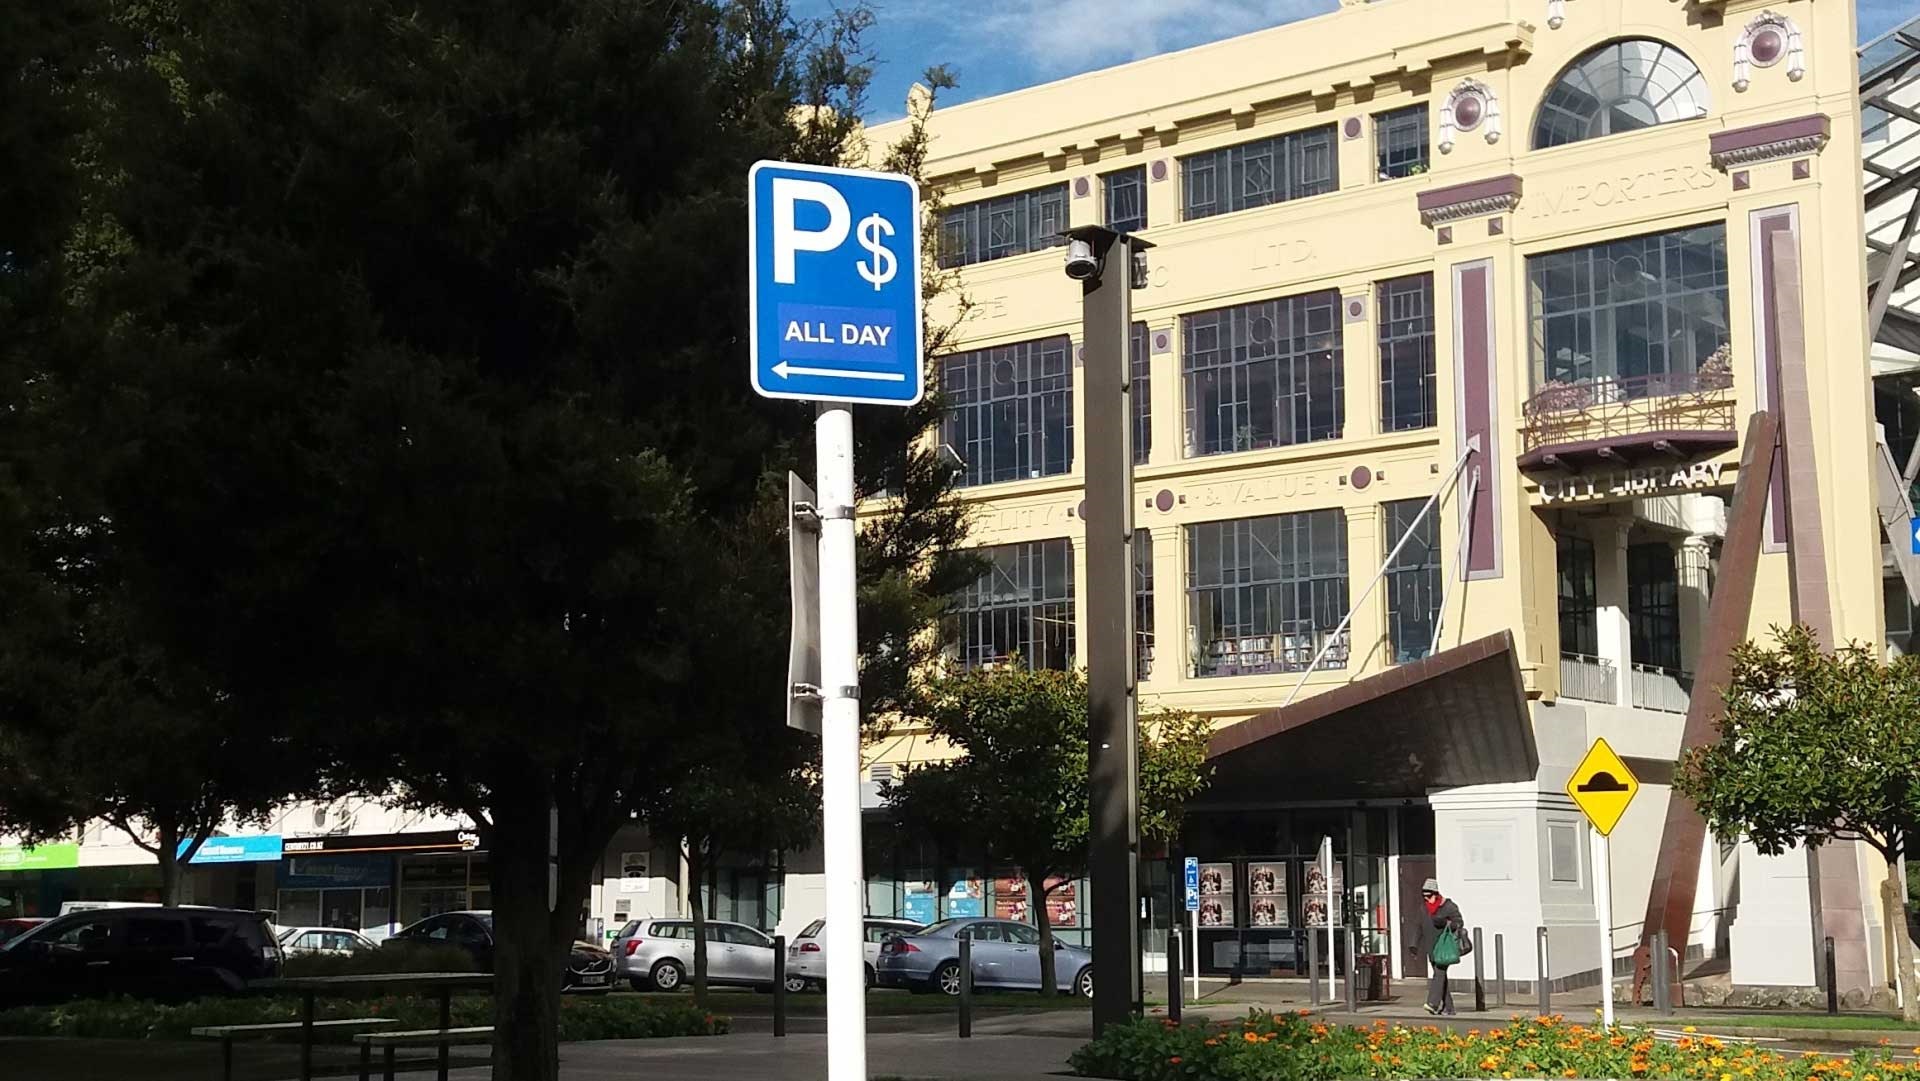 City street with parked cars and $P all day sign.